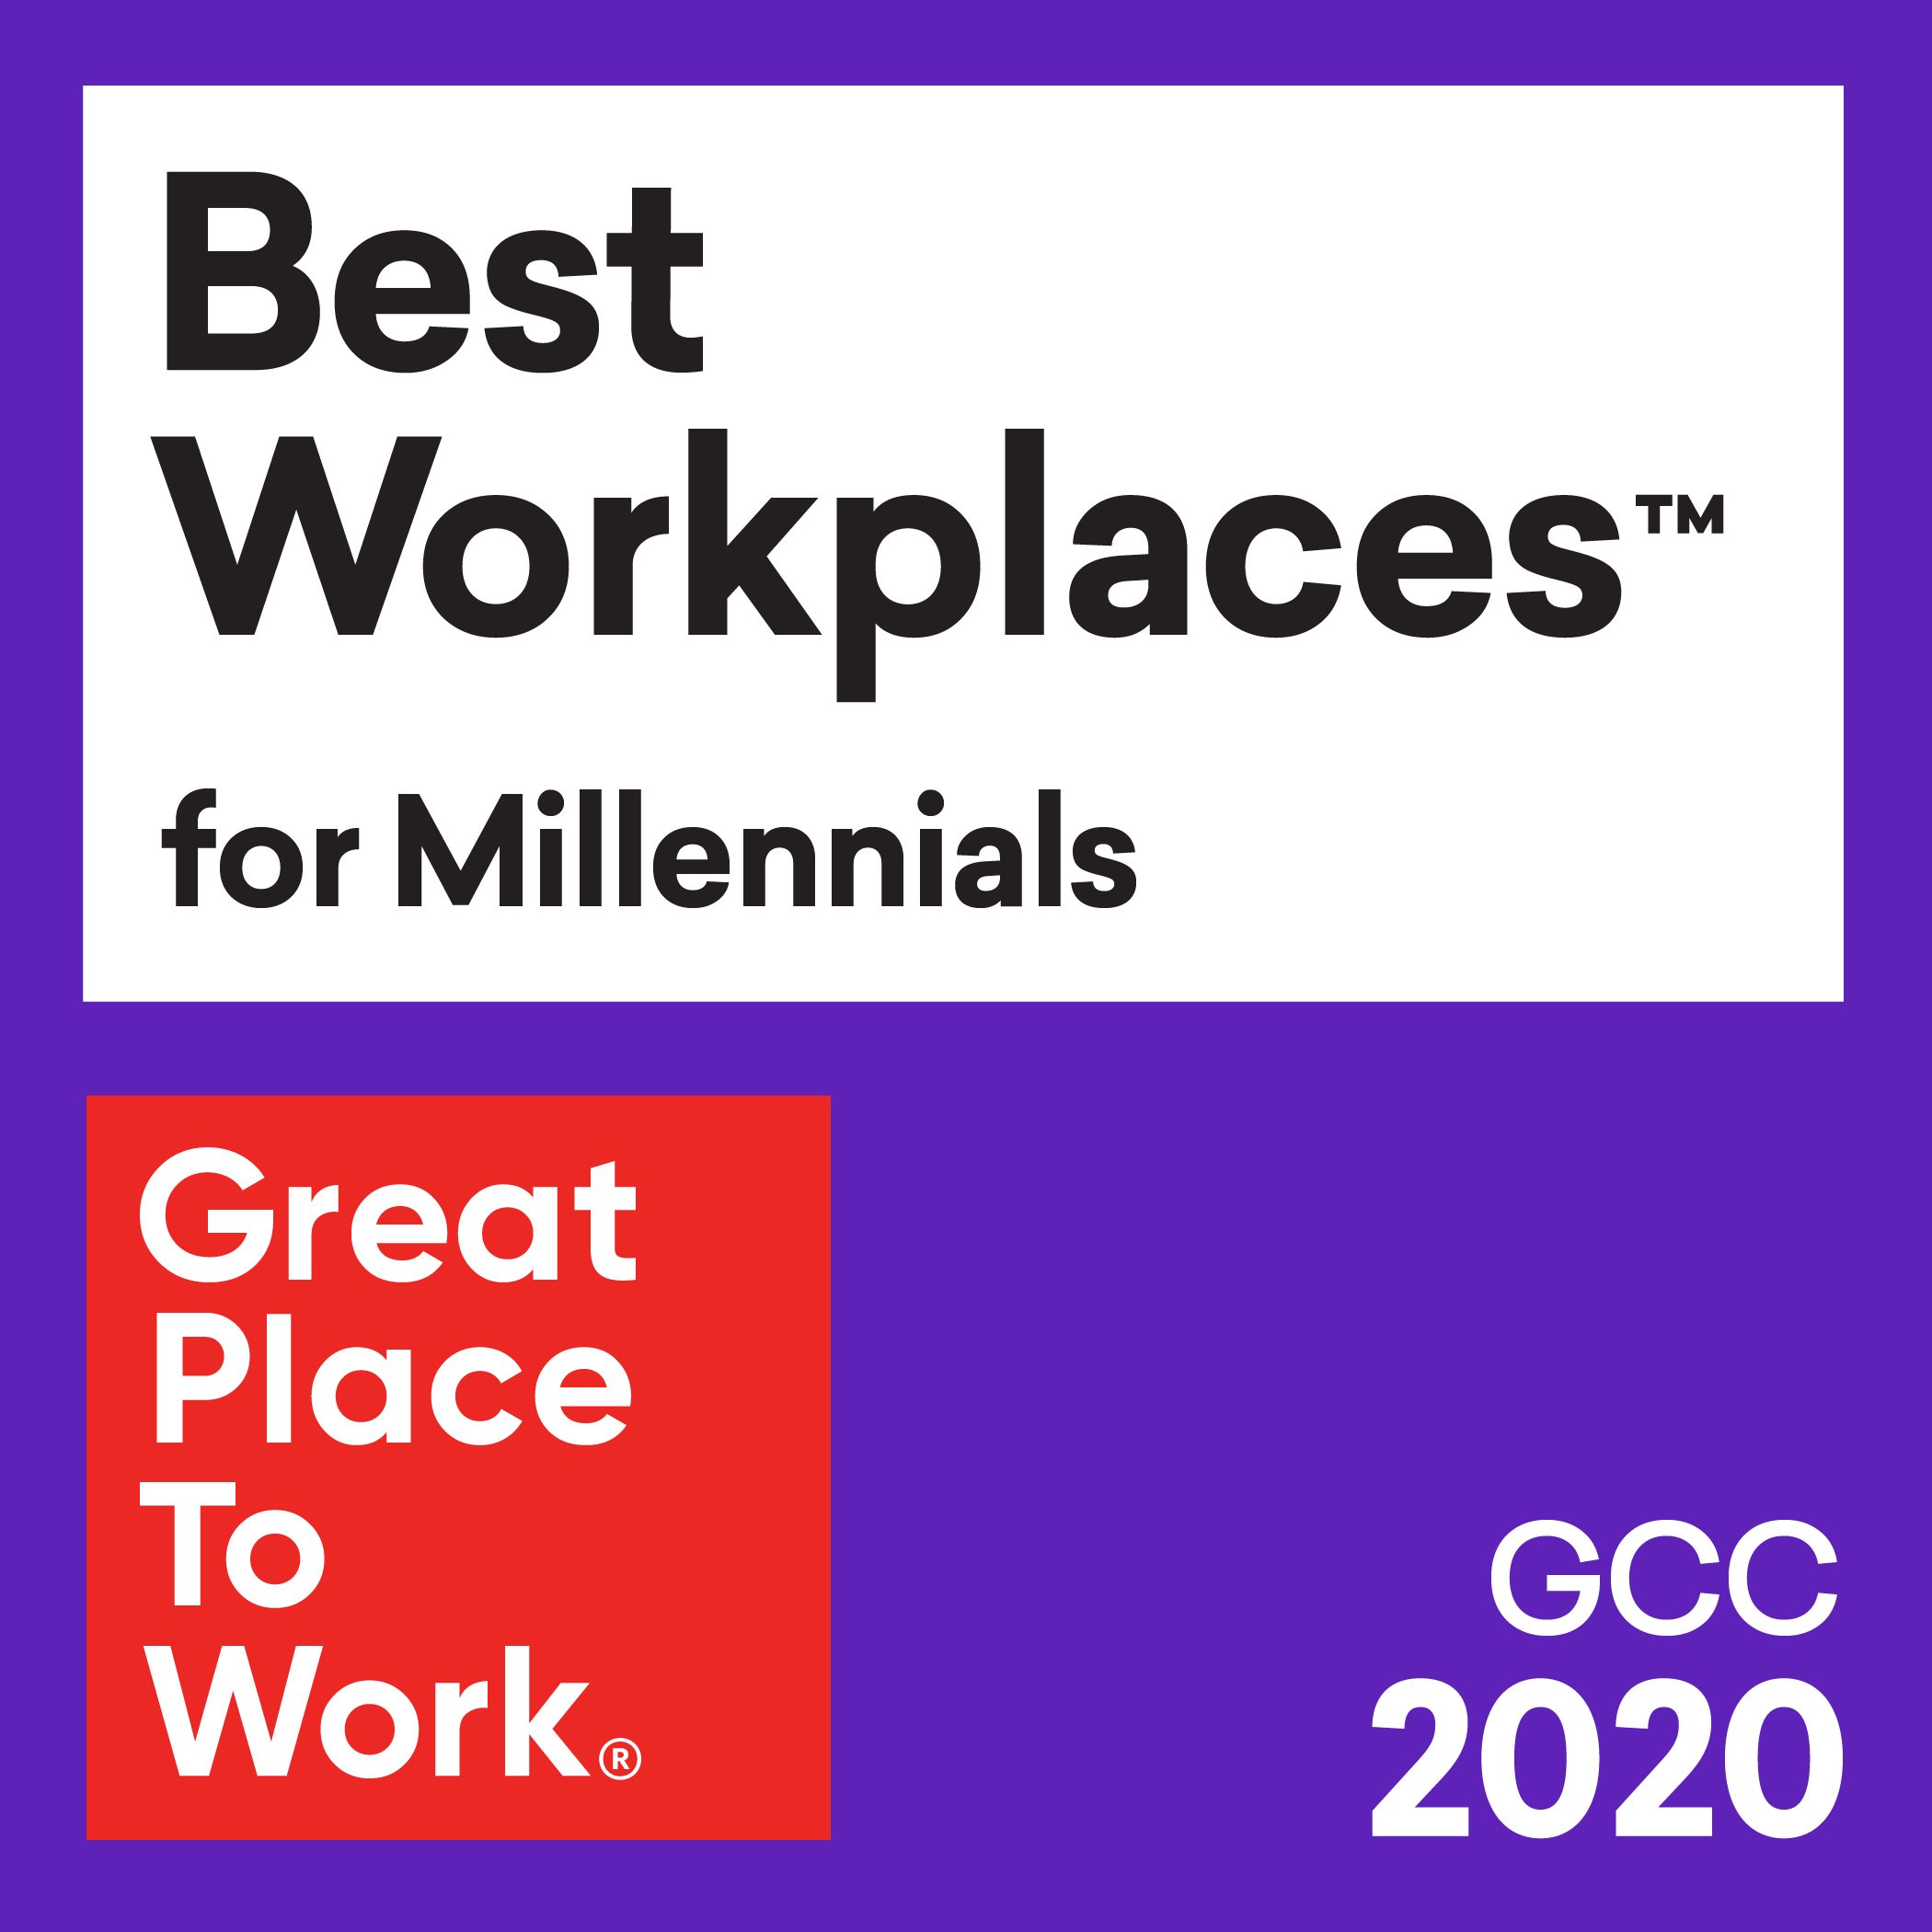 Image for For The First Time In GCC, Great Place To Work® Announces The 30 Best Workplaces For Millennials For 2020